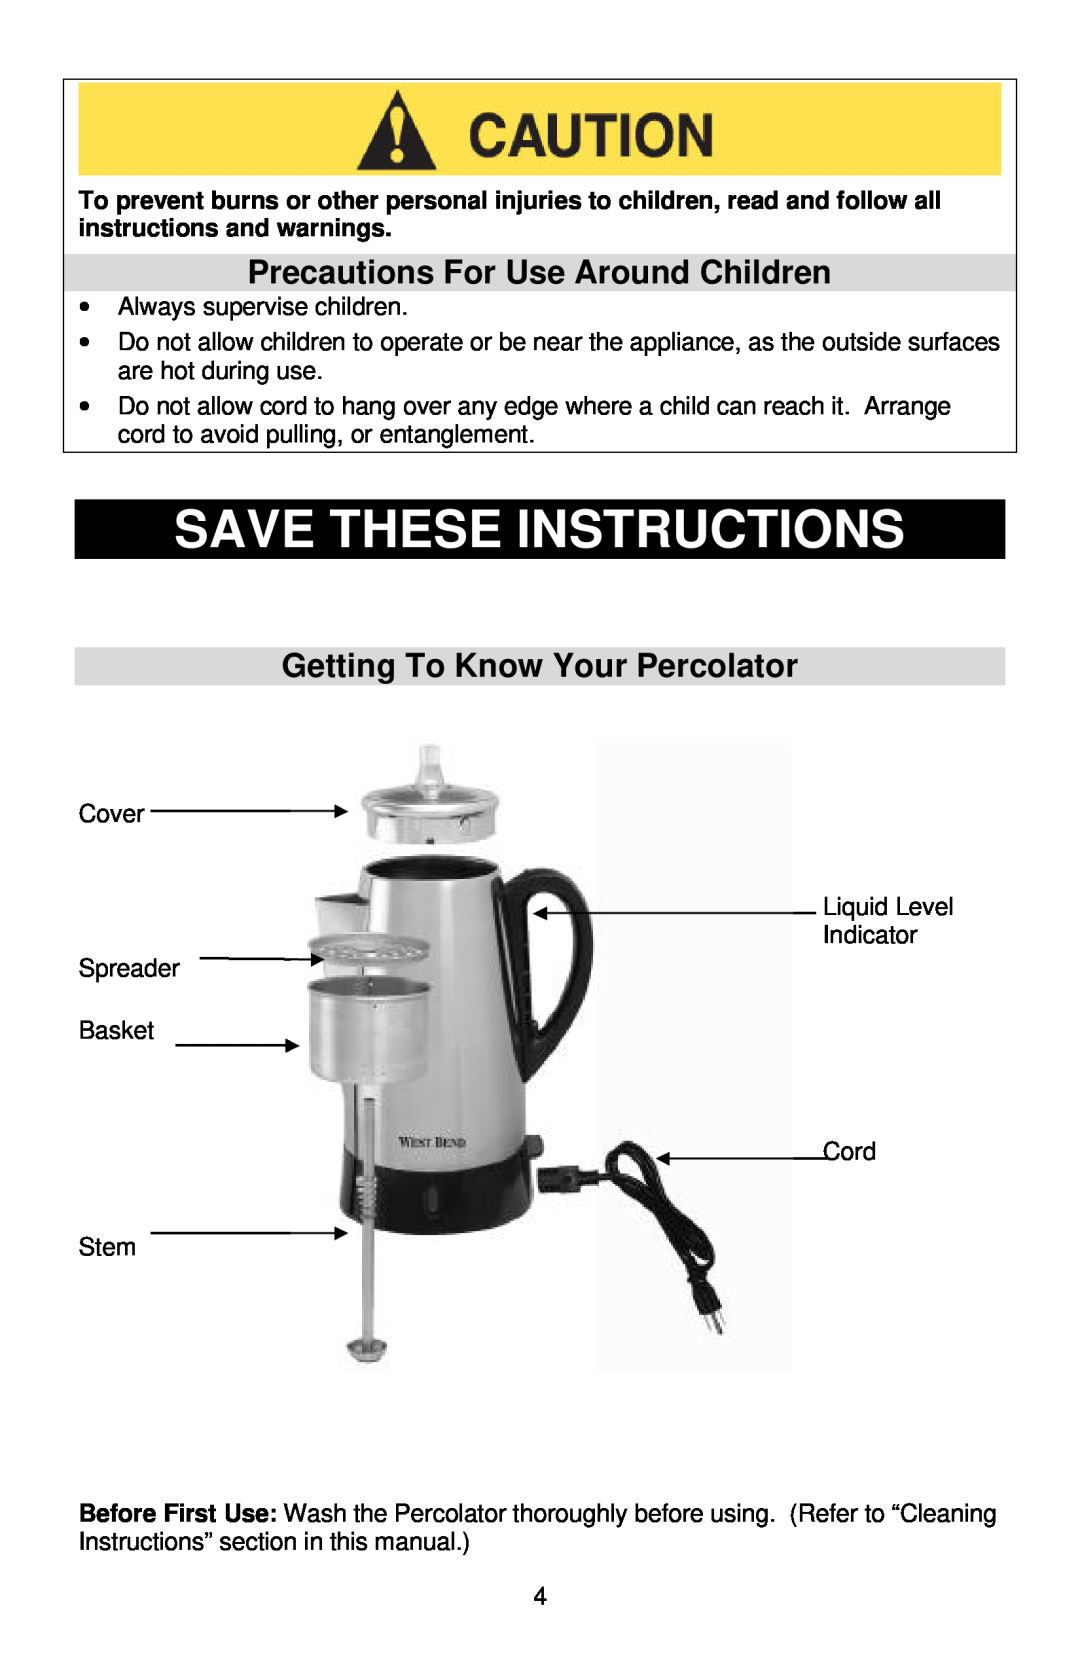 West Bend Coffeemaker manual Save These Instructions, Precautions For Use Around Children, Getting To Know Your Percolator 